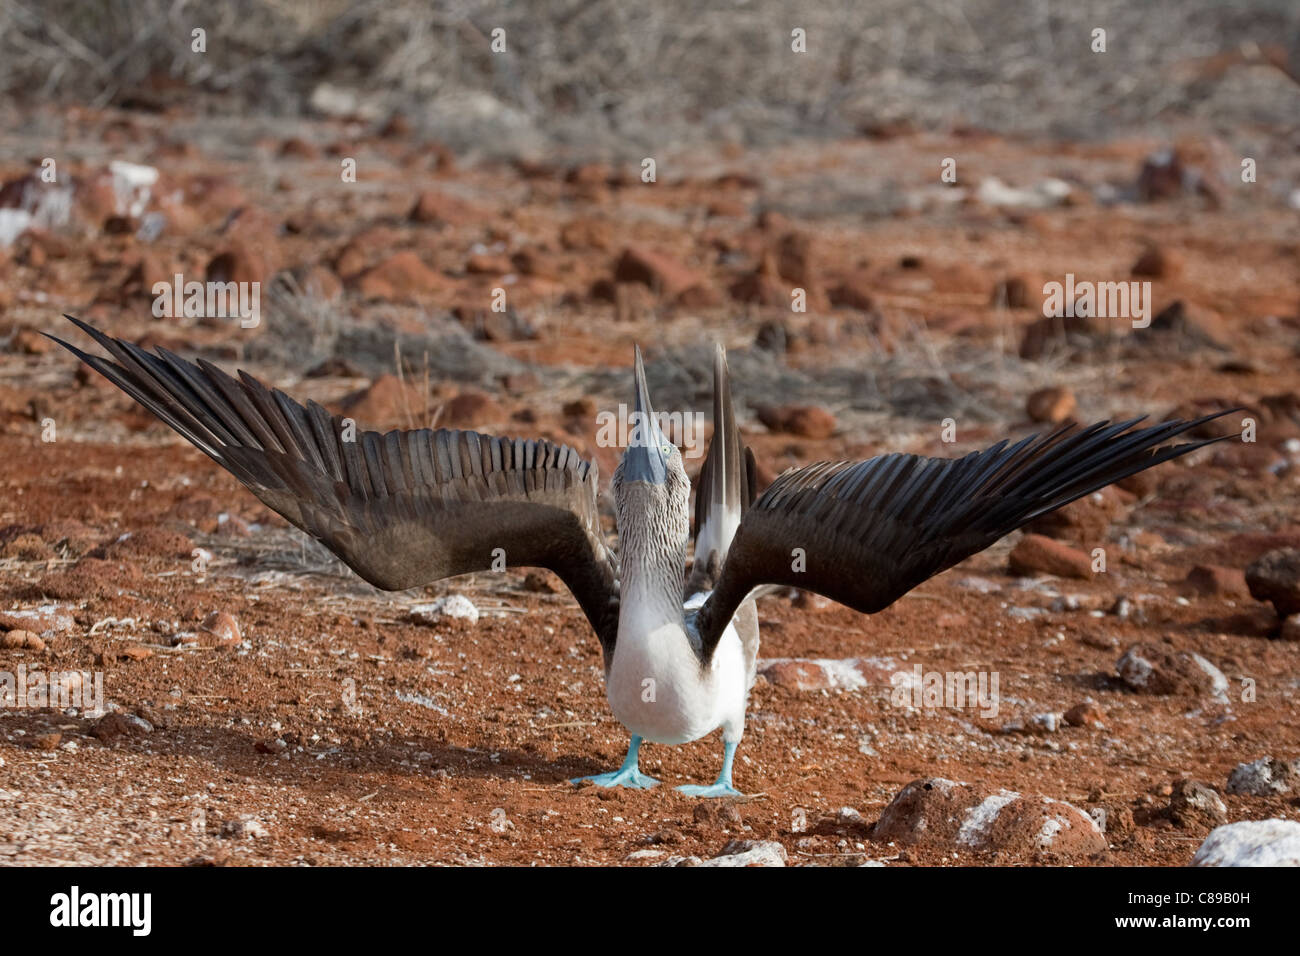 Blue-footed Booby (Sula nebouxii) sky pointing during courtship dance on North Seymour Island in the Galapagos Islands Stock Photo